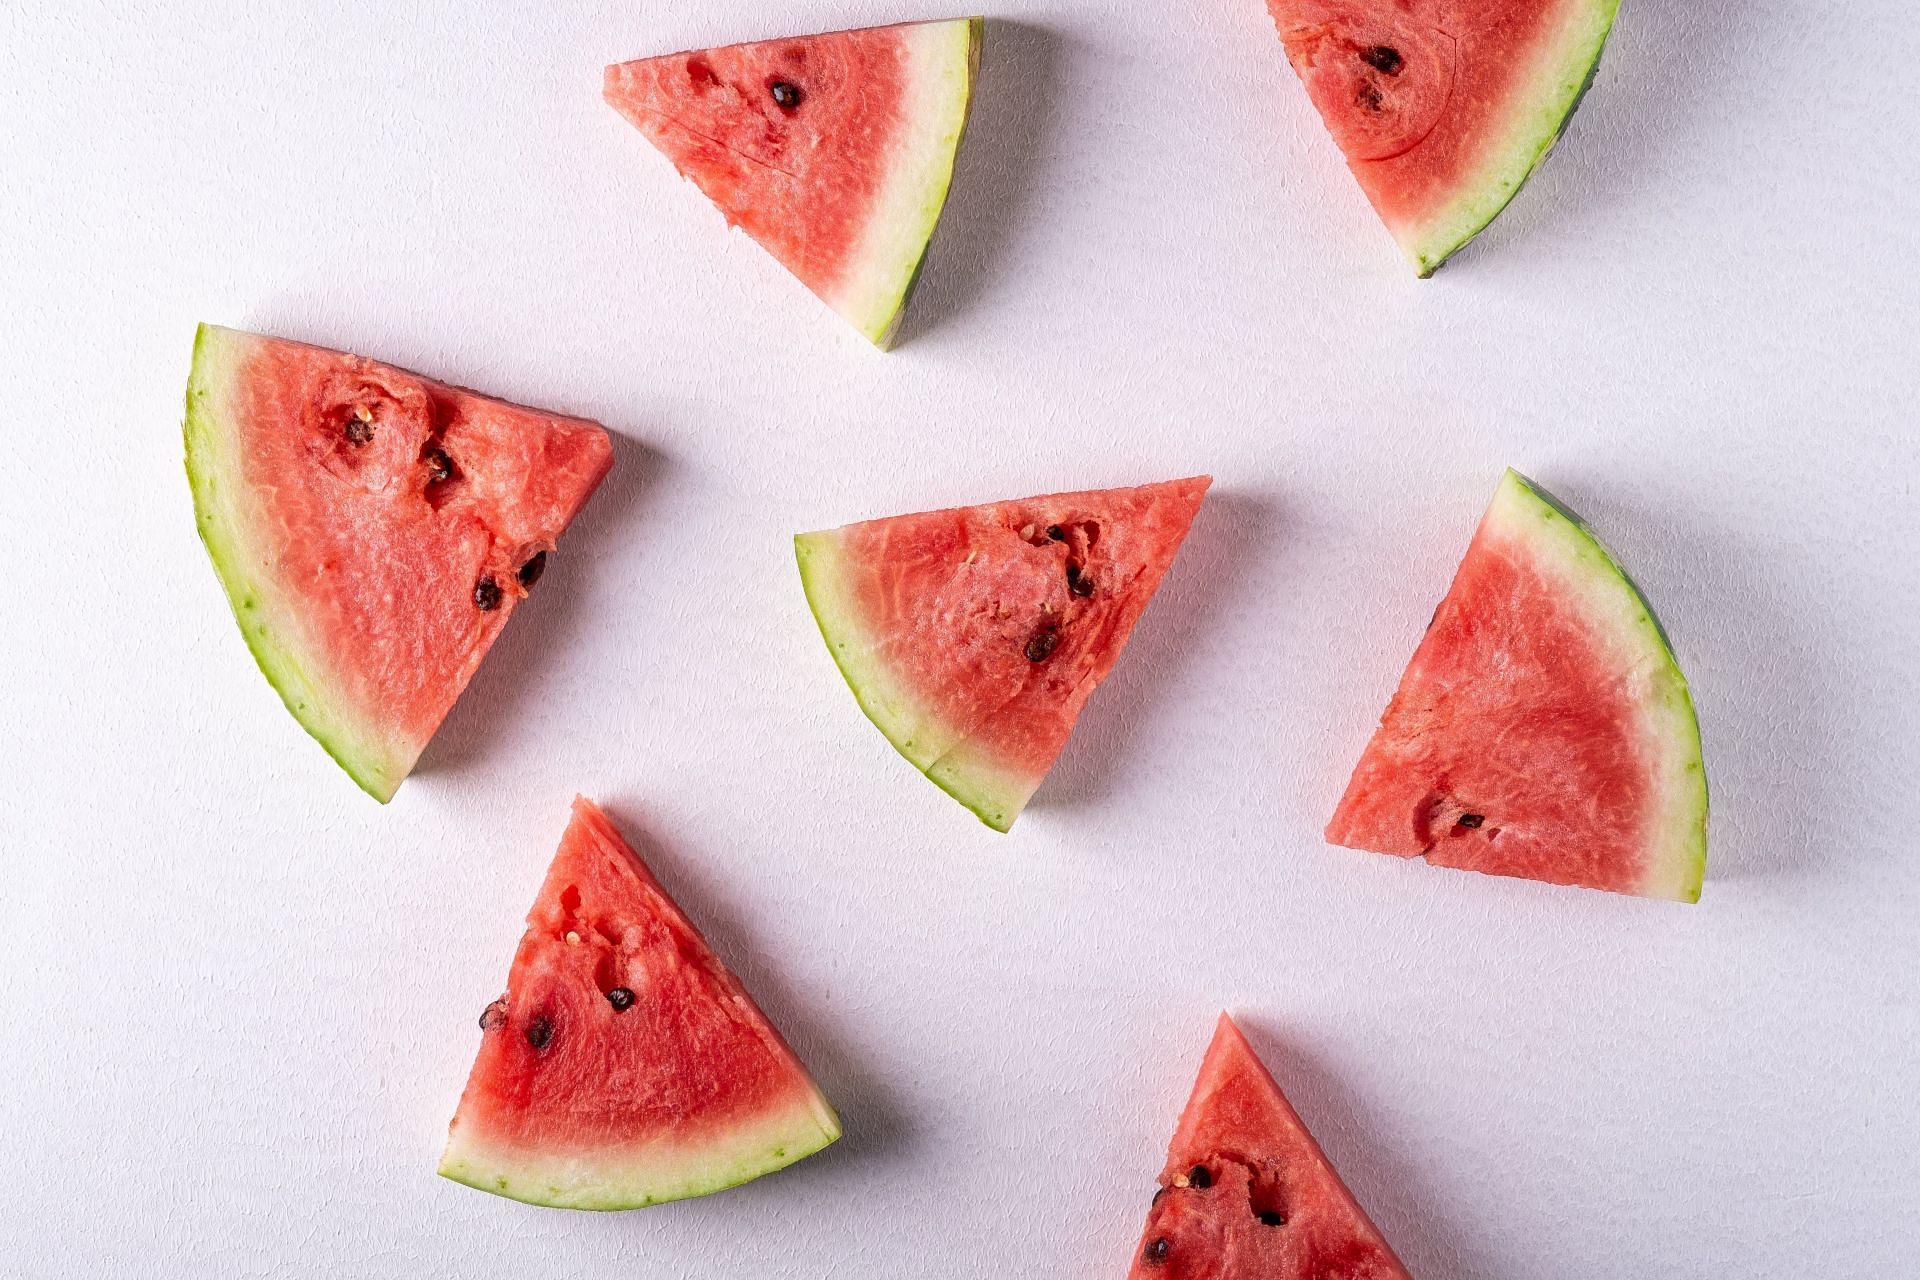 Fruits for empty stomach (Image sourced via Pexels / Photo by kutsaiev)